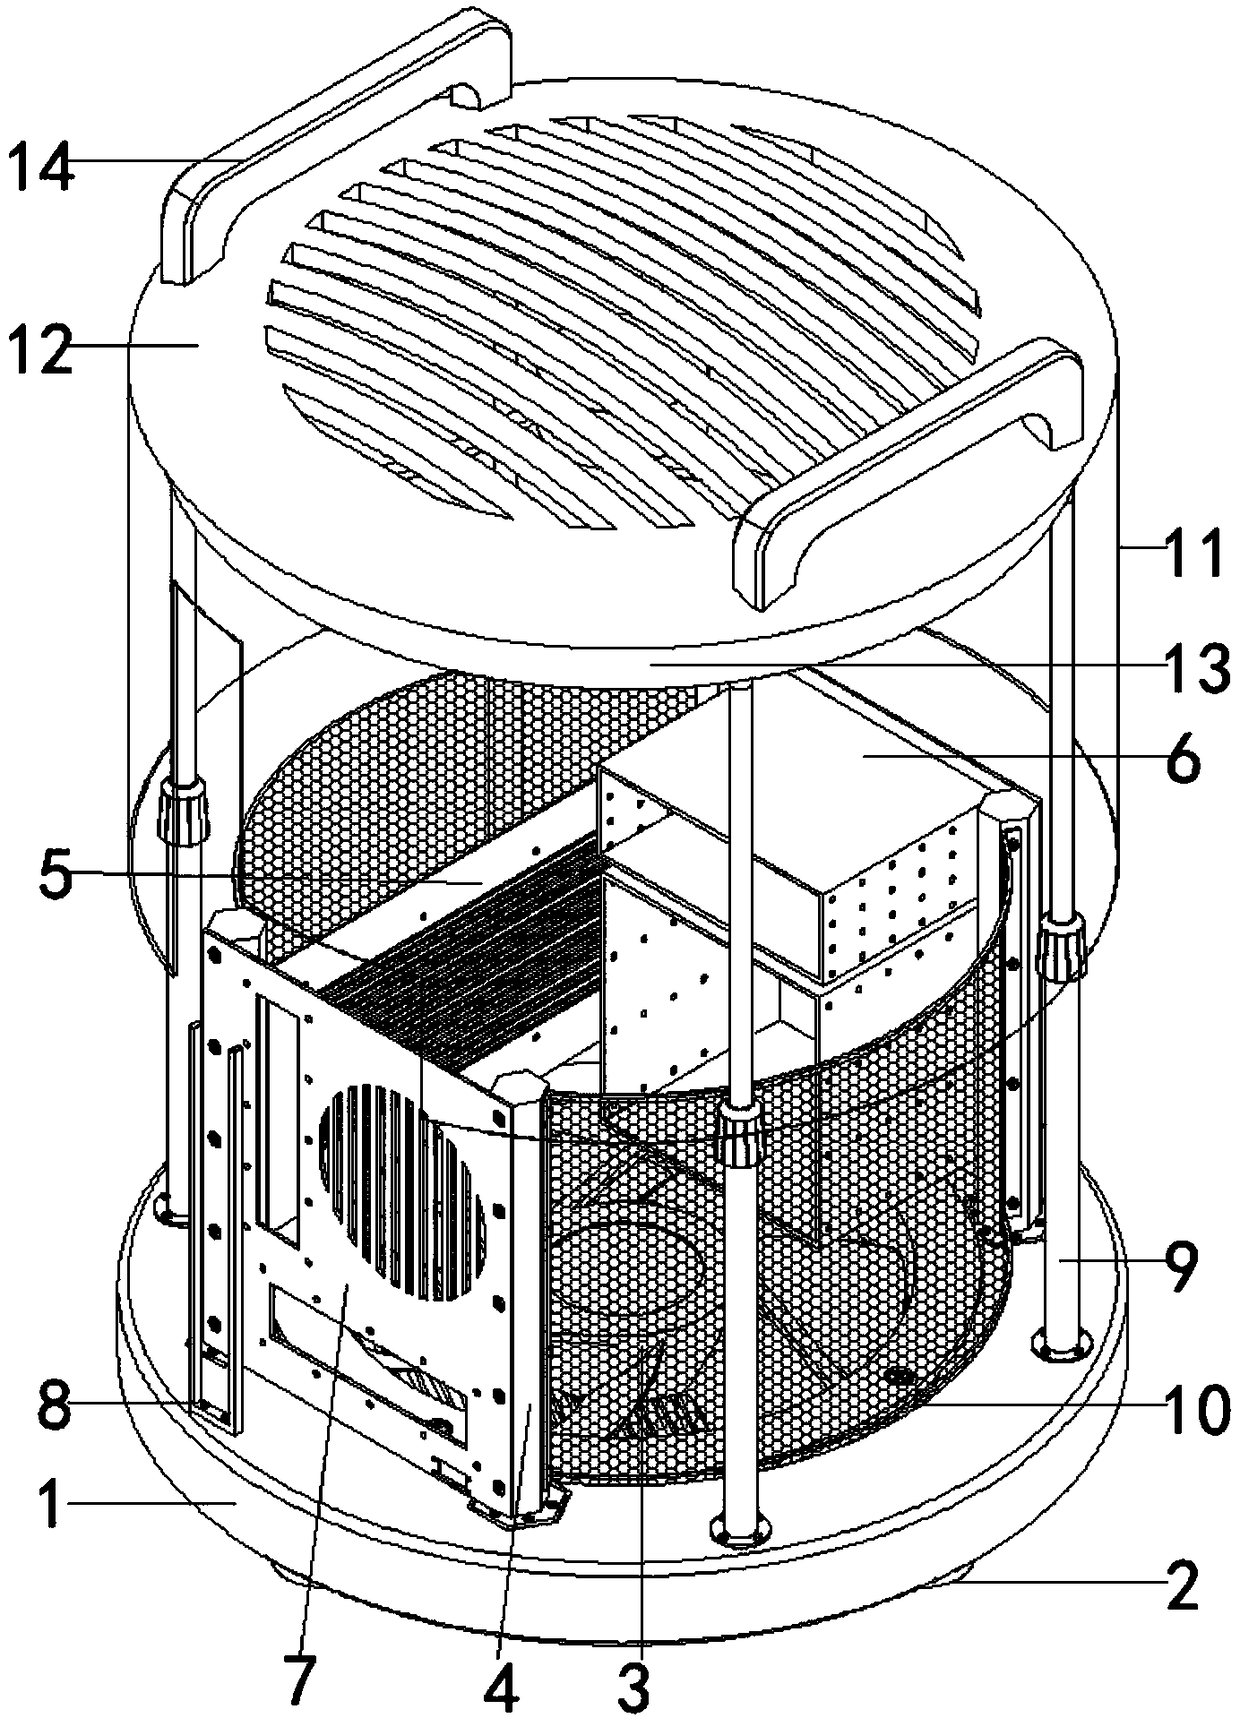 Hollow server case structure of computer